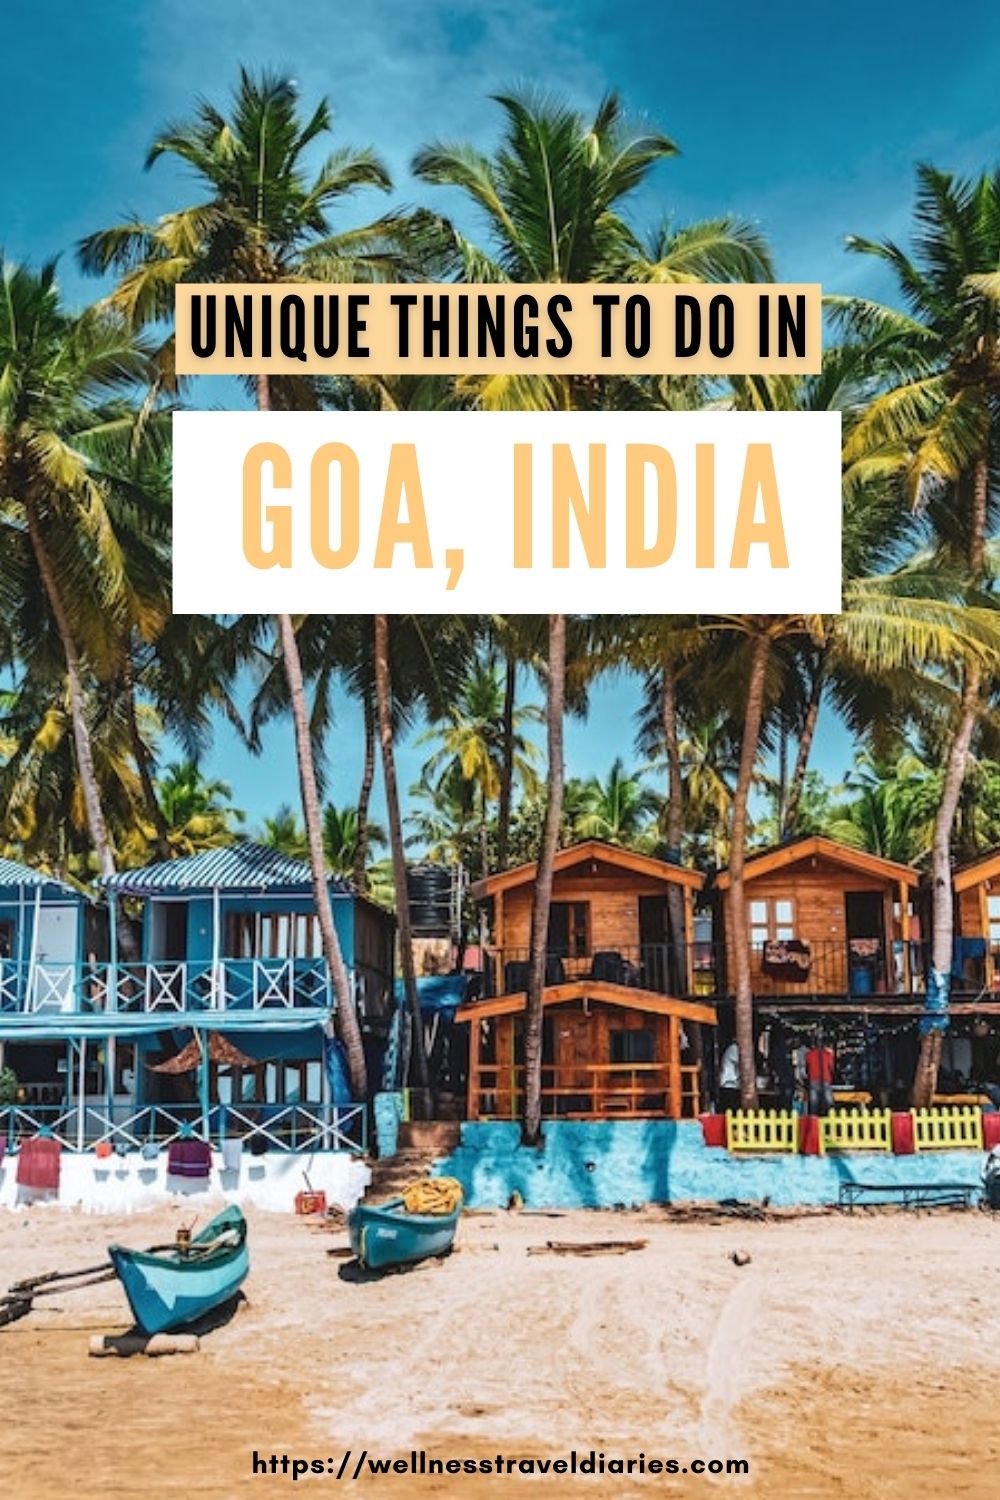 How To Plan Epic Holidays In Goa: A Five Day Guide - Wellness Travel ...